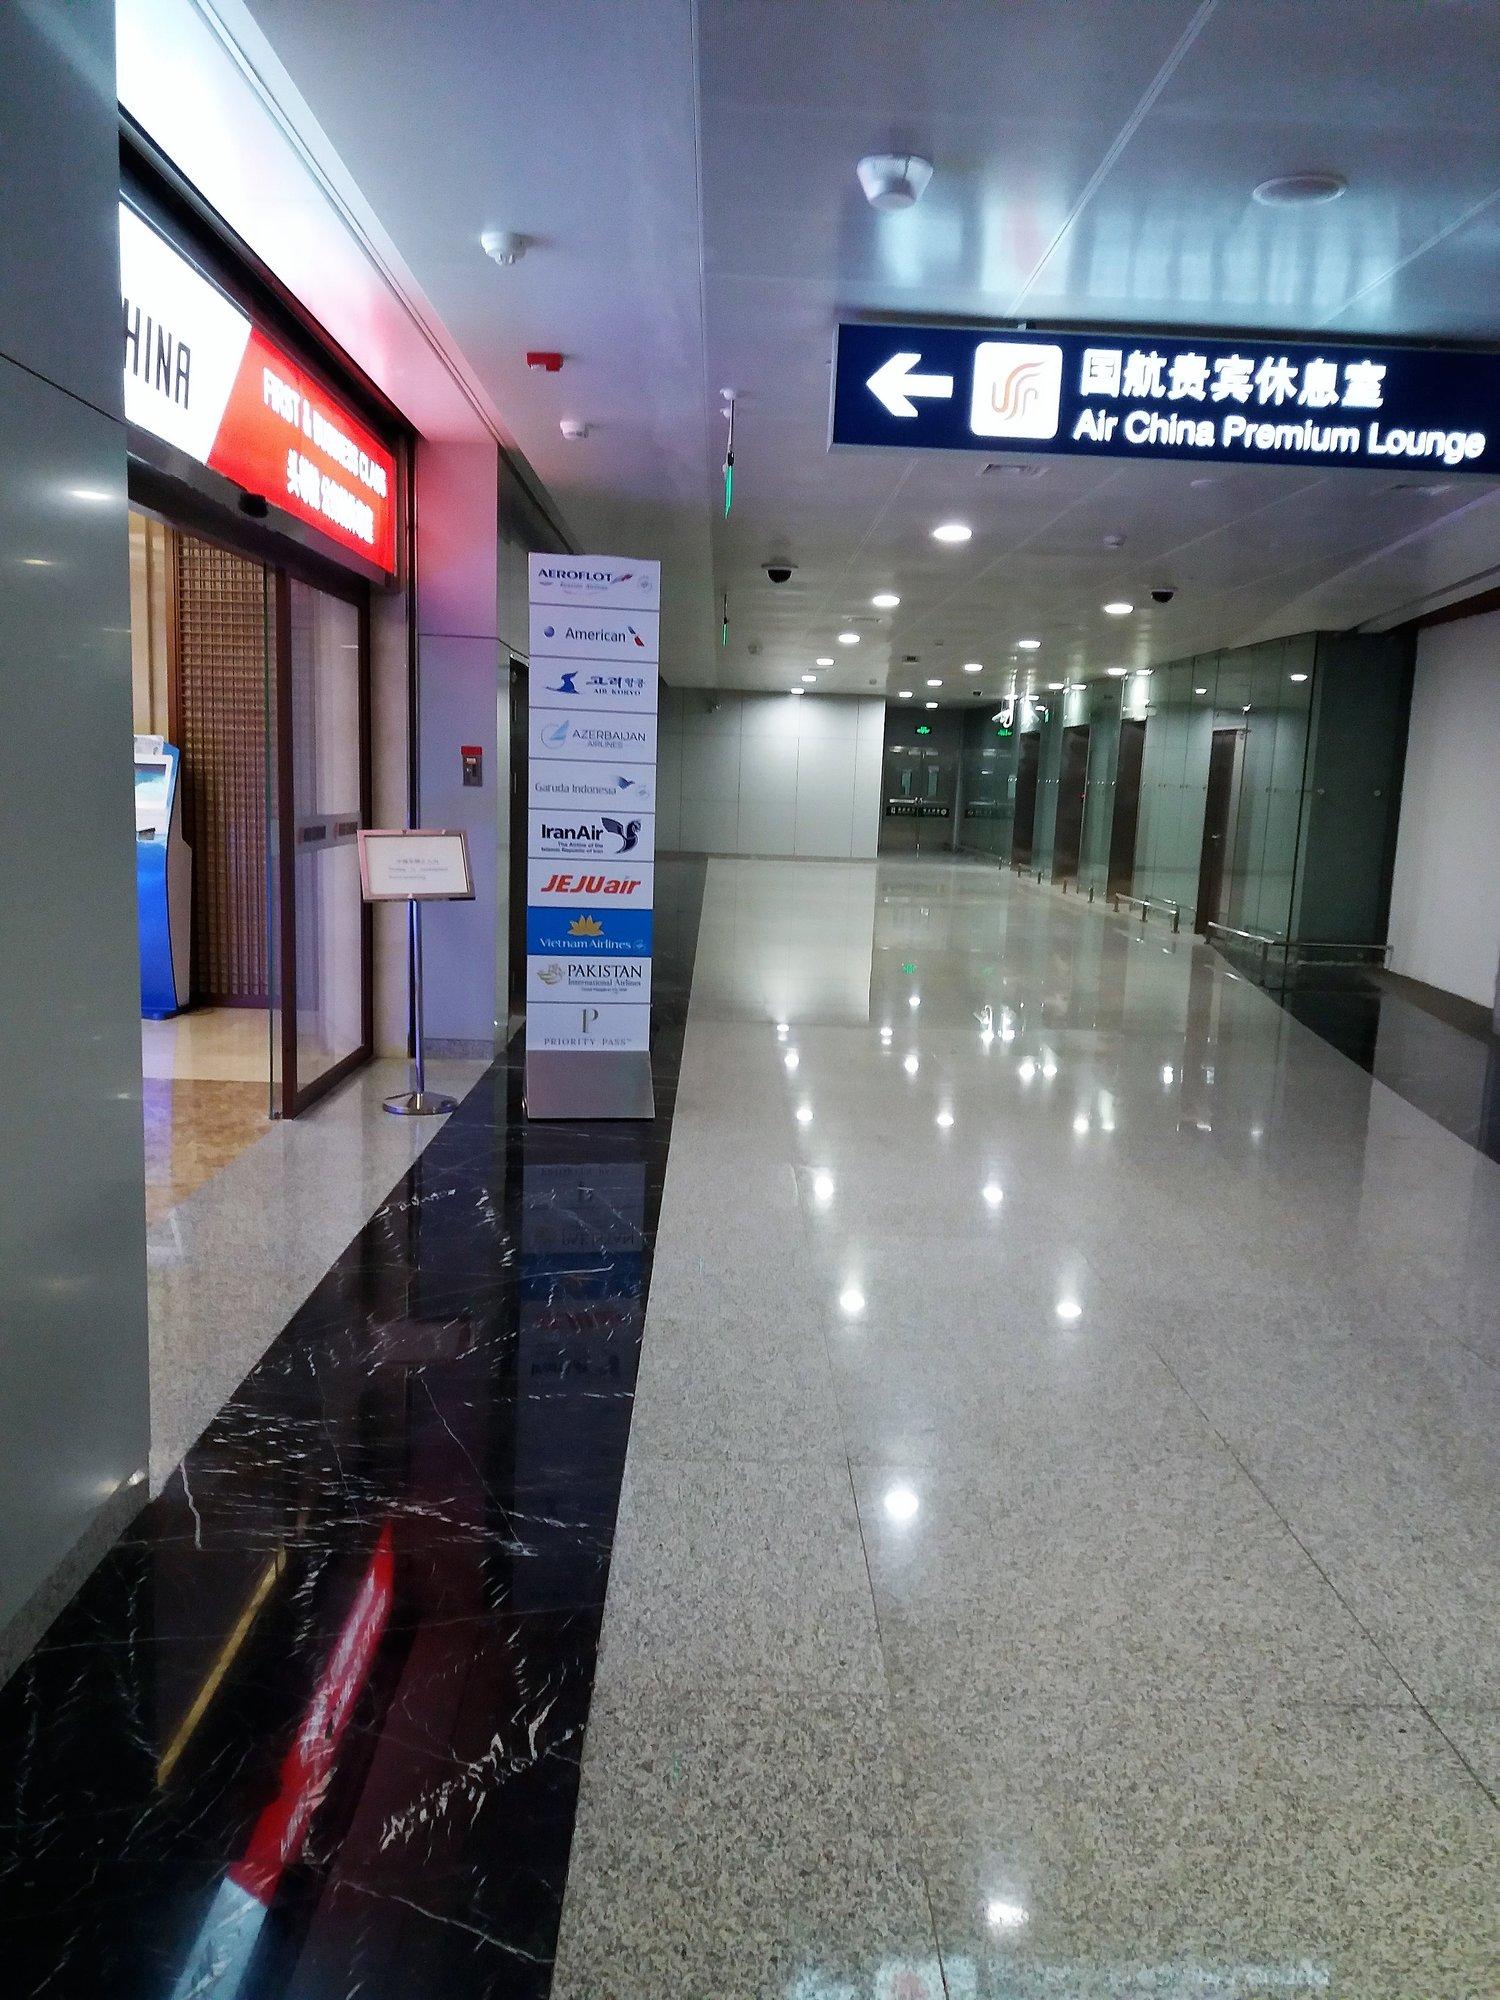 Air China First & Business Class Lounge image 11 of 12